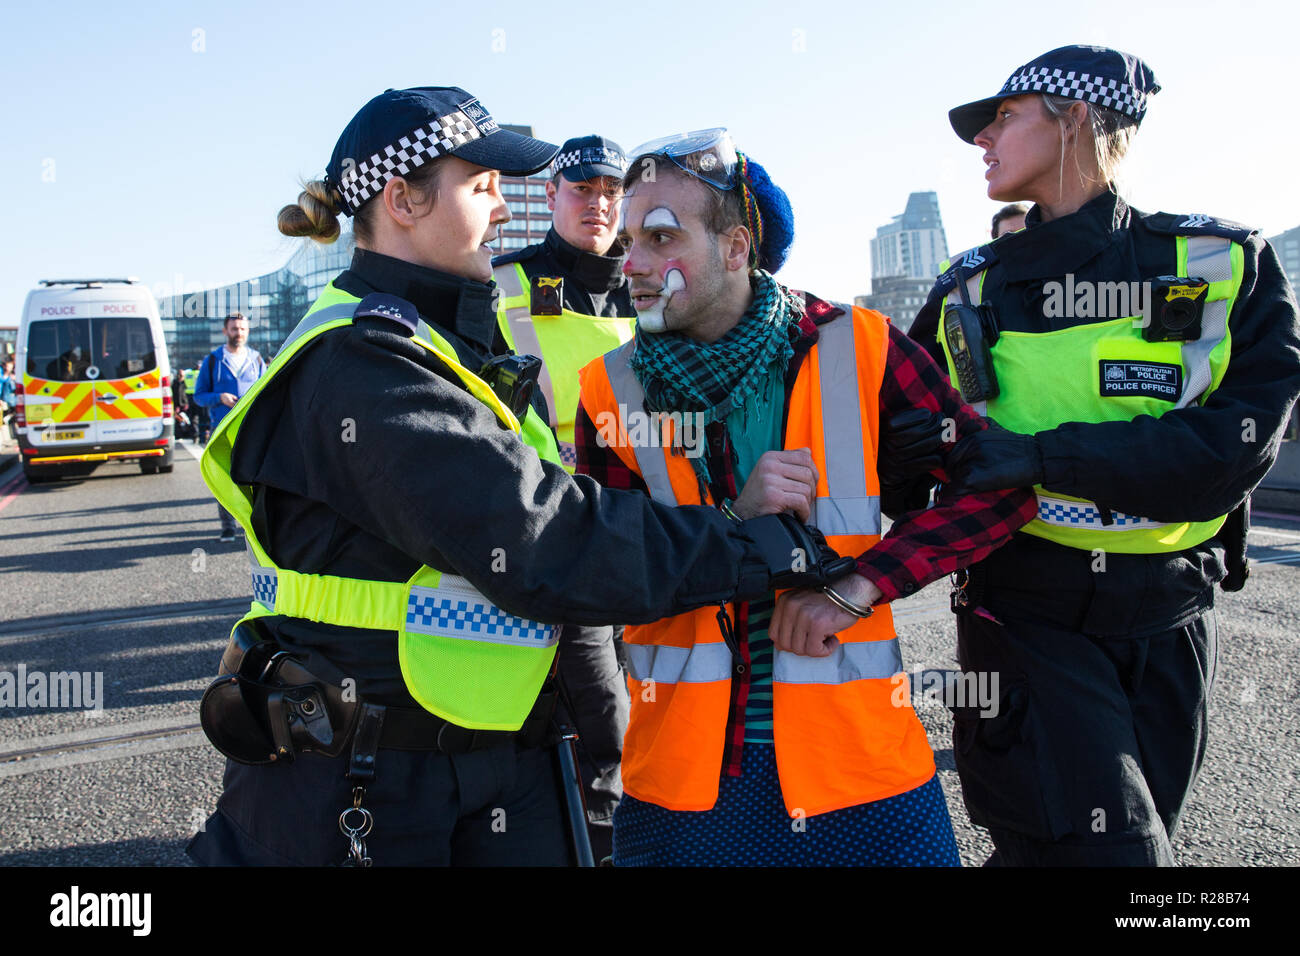 London, UK. 17th November, 2018. Police officers arrest a clown from Clandestine Insurgent Rebel Clown Army (CIRCA) after environmental campaigners from Extinction Rebellion blocked Lambeth Bridge, one of five bridges blocked in central London, as part of a Rebellion Day event to highlight 'criminal inaction in the face of climate change catastrophe and ecological collapse' by the UK Government as part of a programme of civil disobedience during which scores of campaigners have been arrested. Credit: Mark Kerrison/Alamy Live News Stock Photo